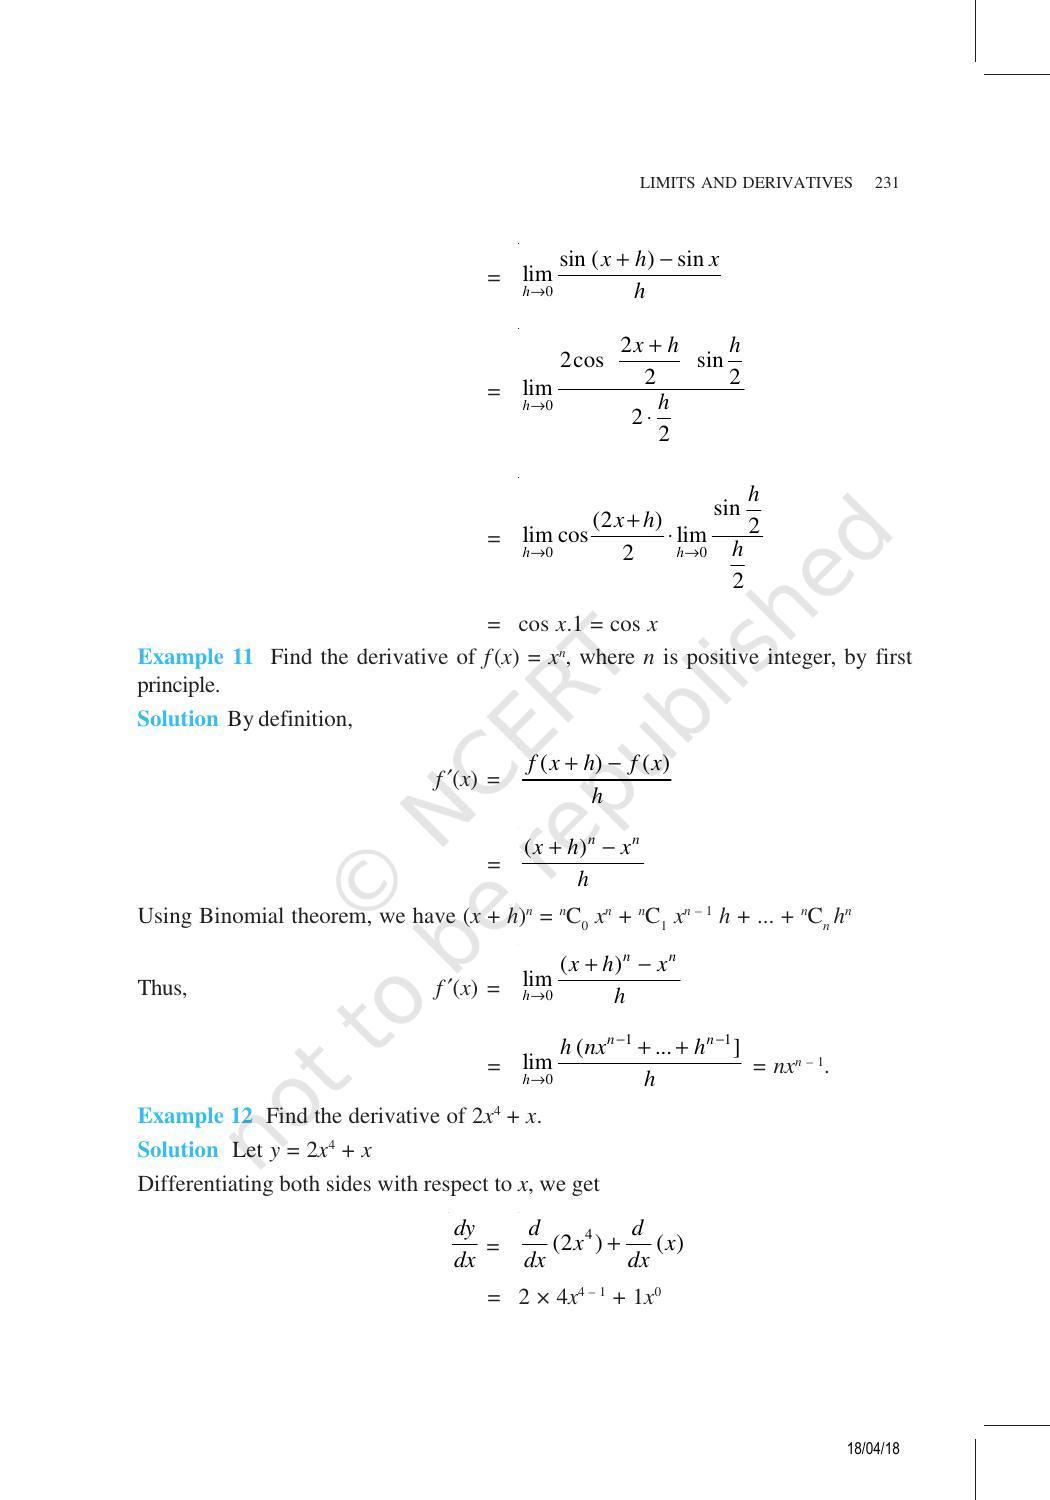 NCERT Exemplar Book for Class 11 Maths: Chapter 13 Limits and Derivatives - Page 7